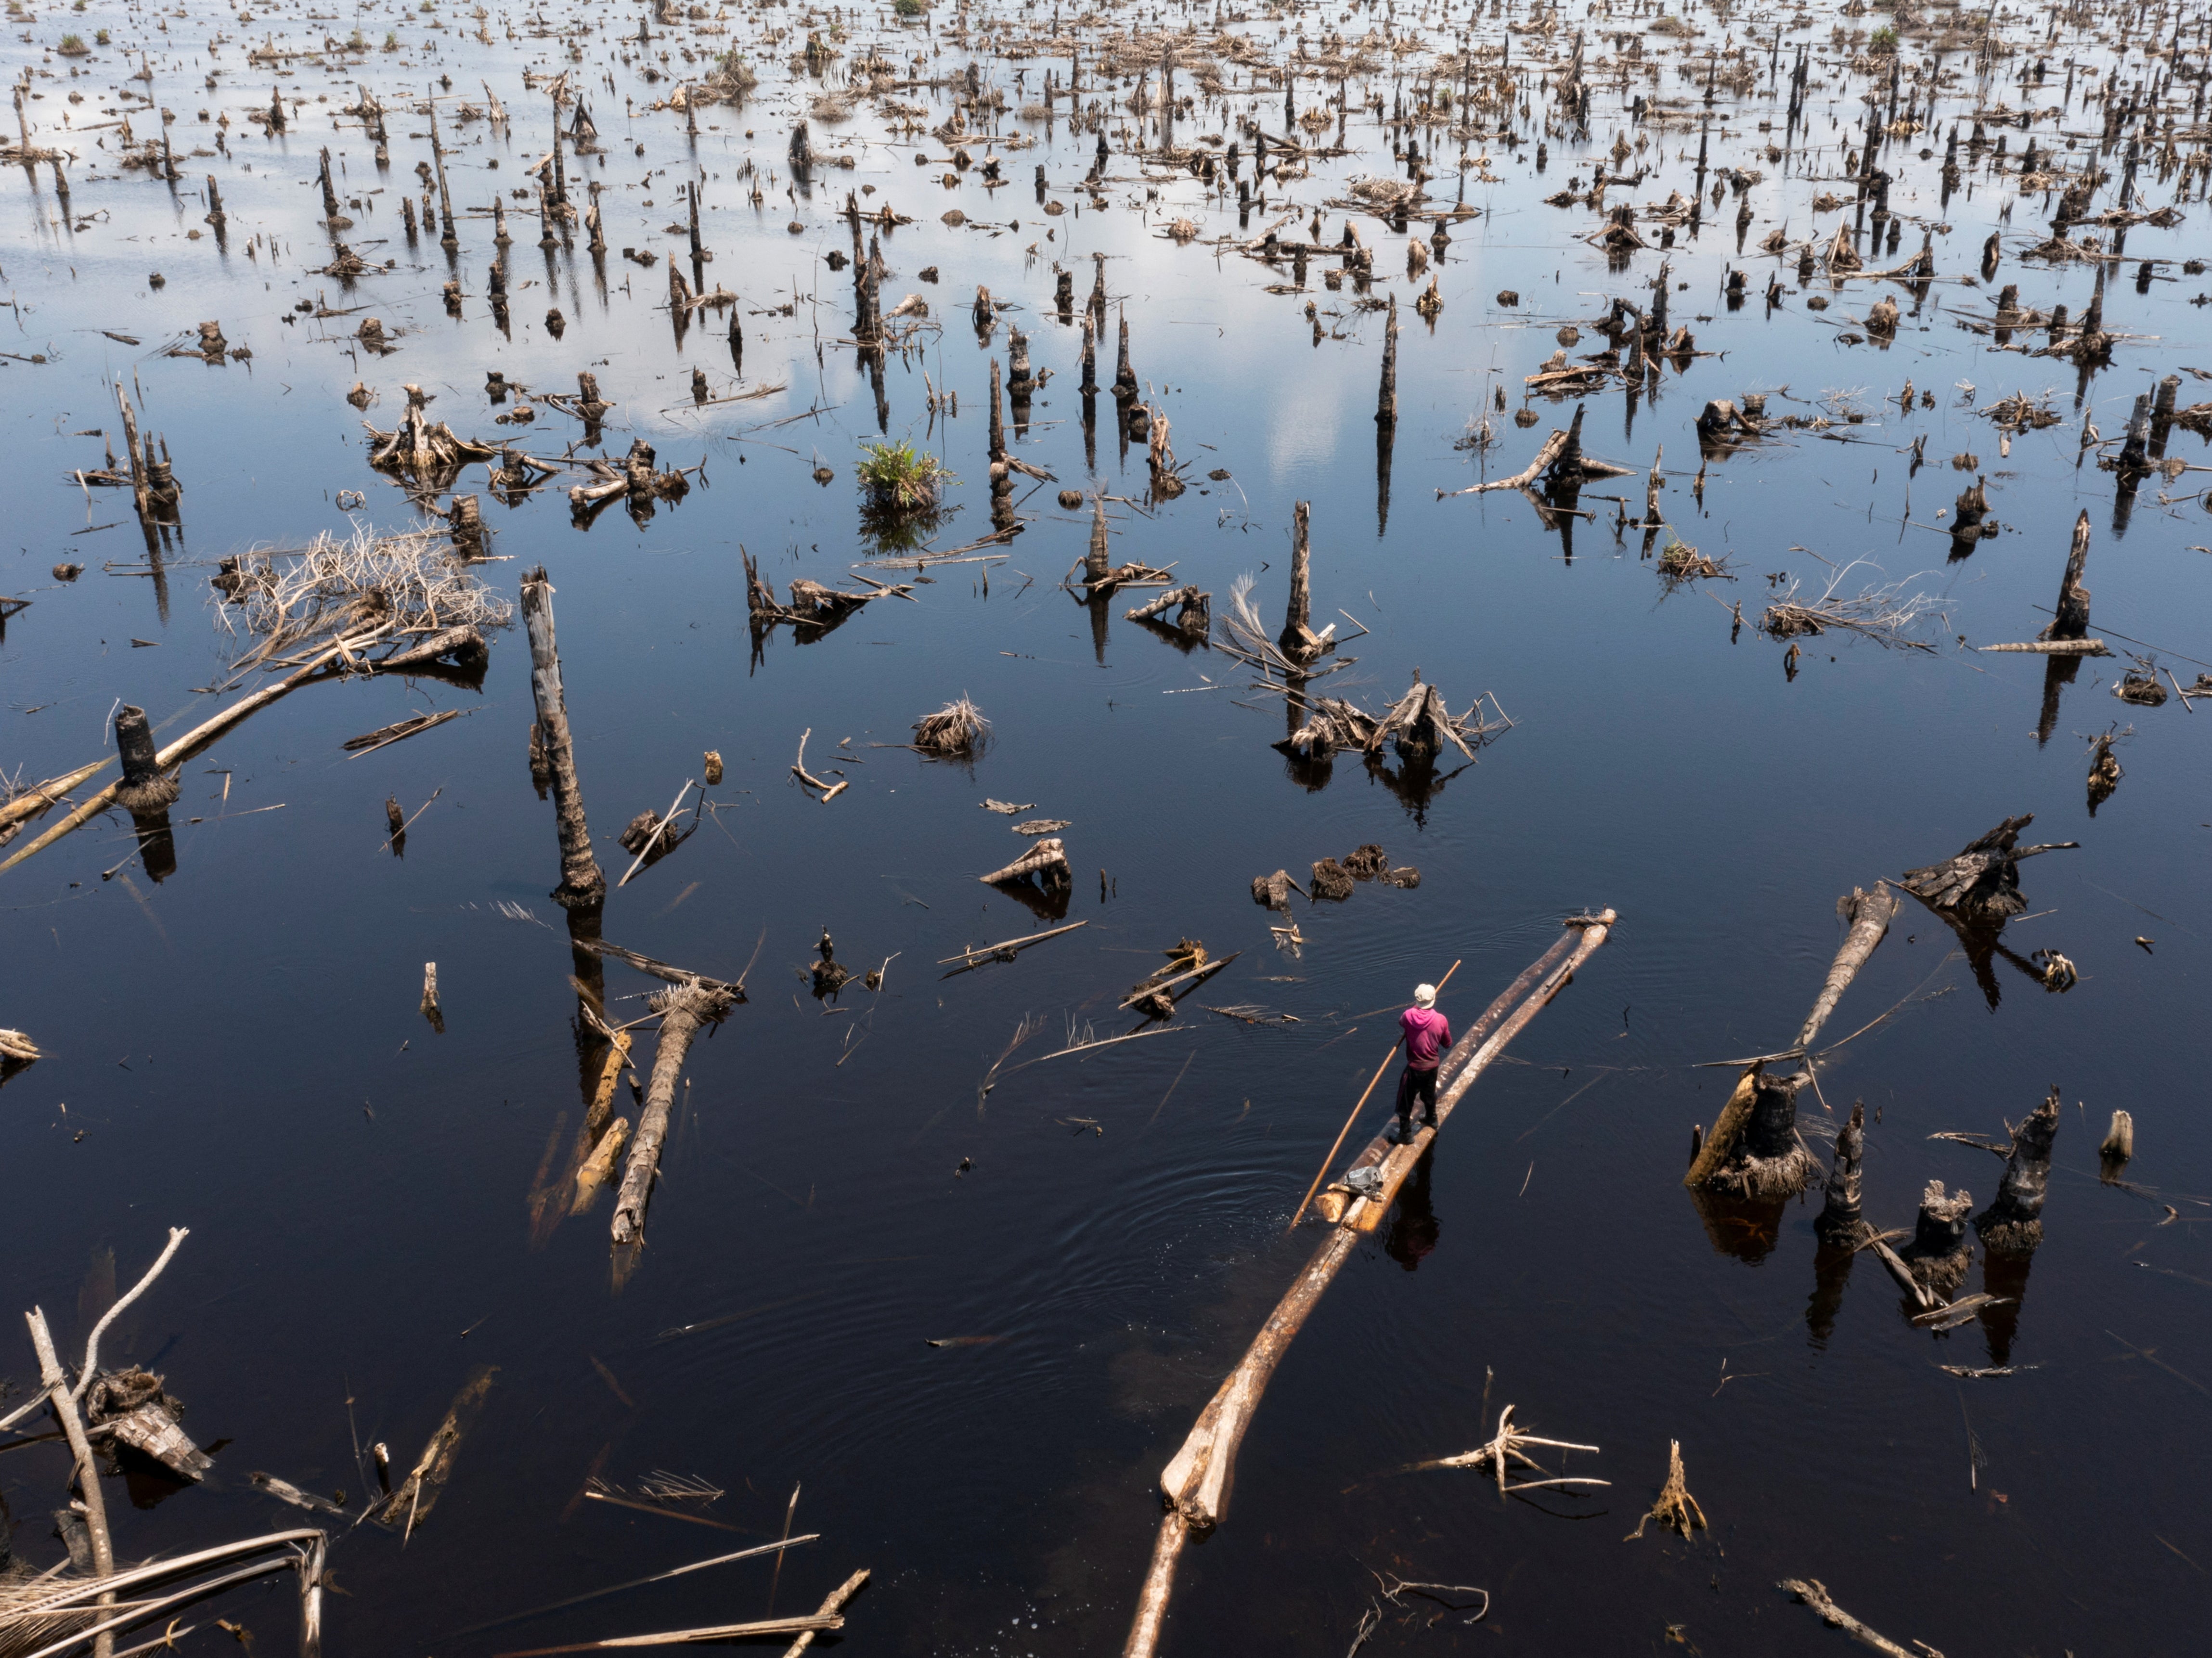 Egbontoluwa Marigi paddles his logs out of the flooded forest floor onto the river in Ipare, Ondo state, Nigeria